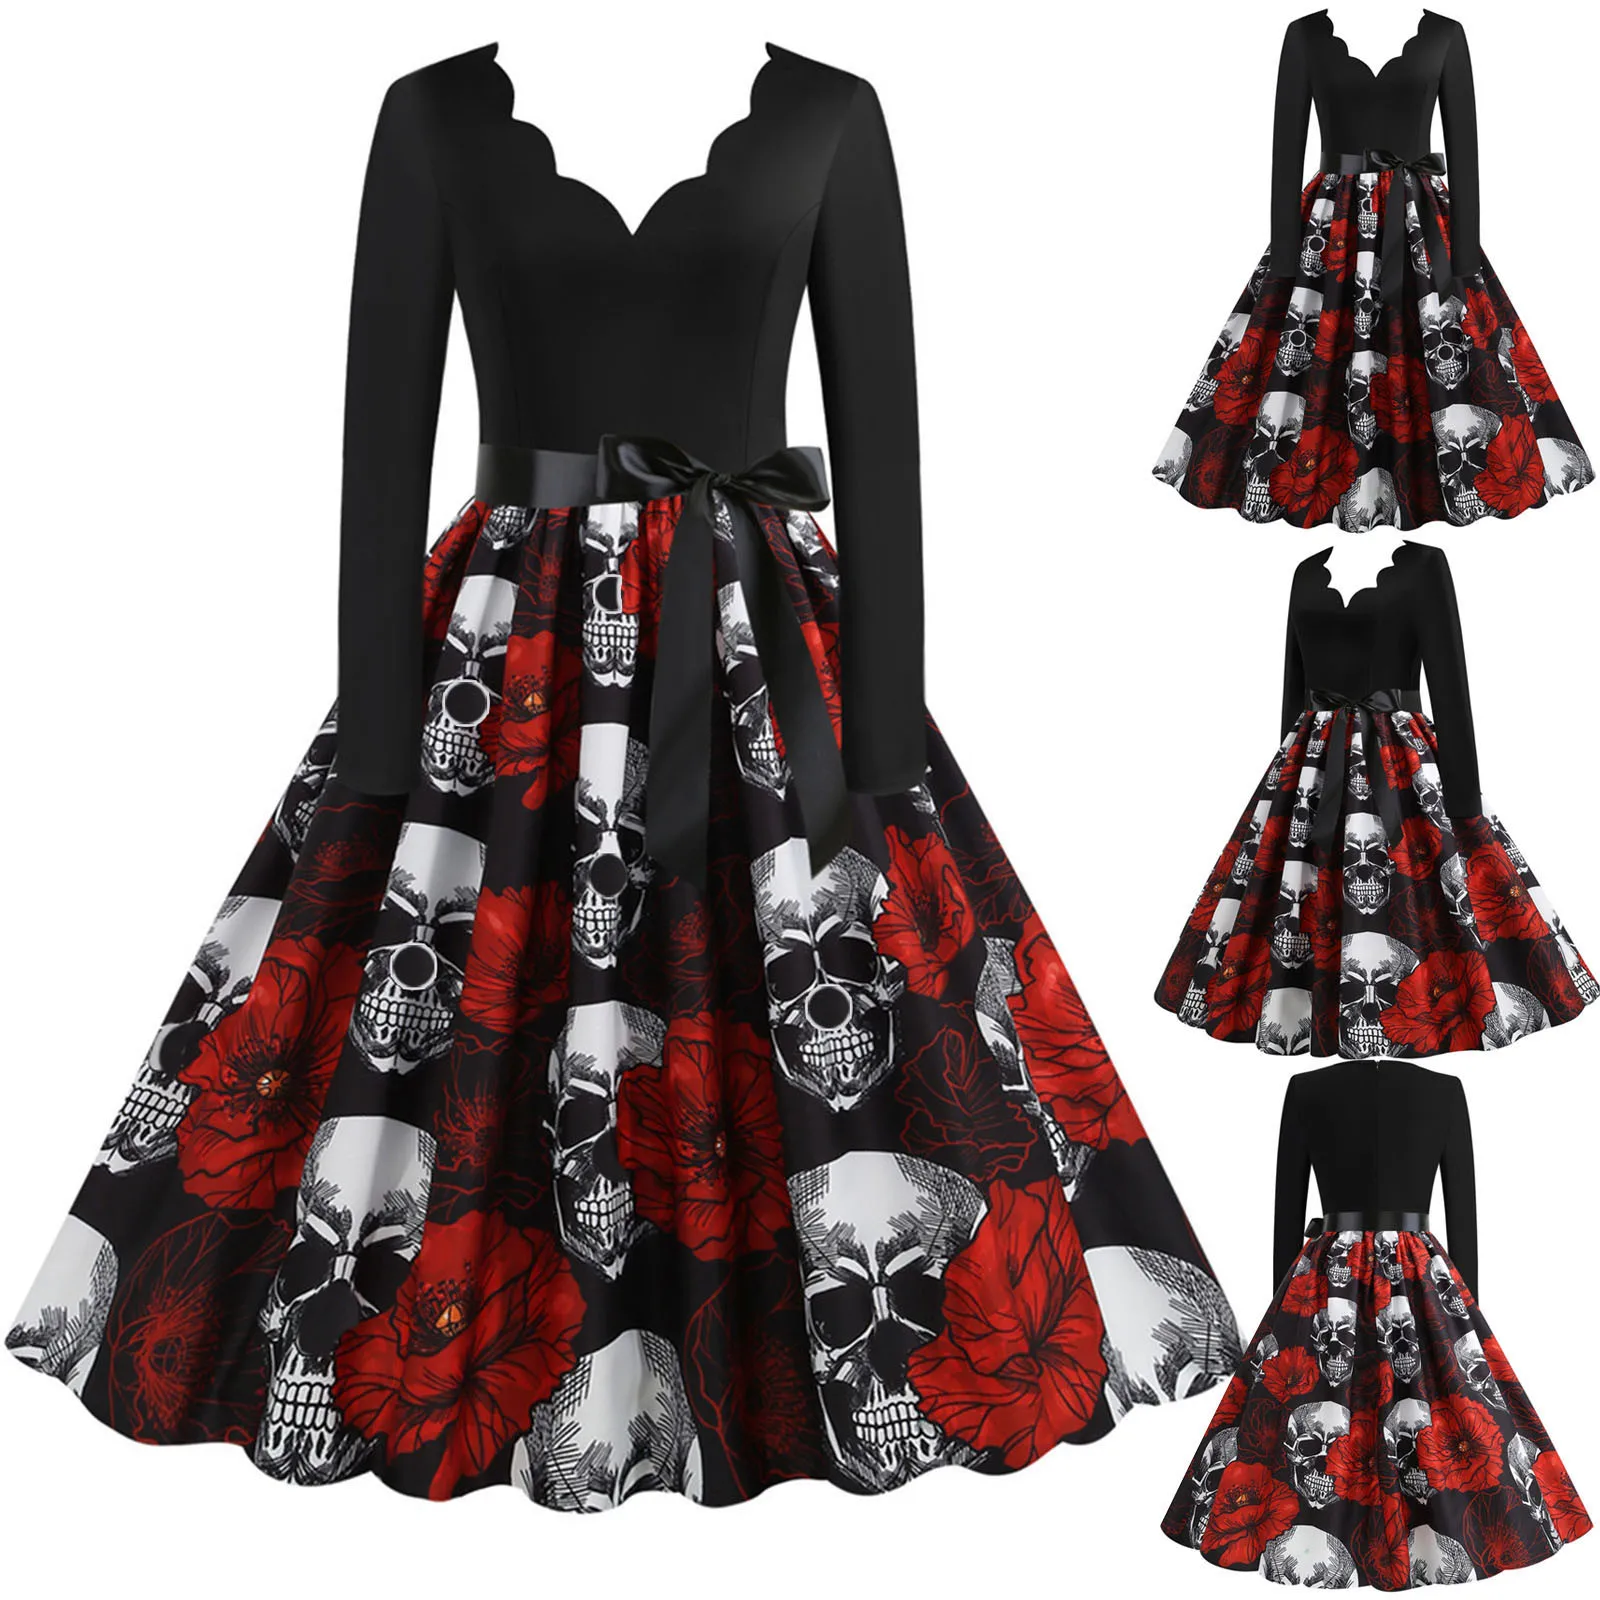 Skull Print Halloween Costumes For Women Long Sleeve 1950s Housewife Evening Party Prom Dress Elegant Scary Cosplay Costumes